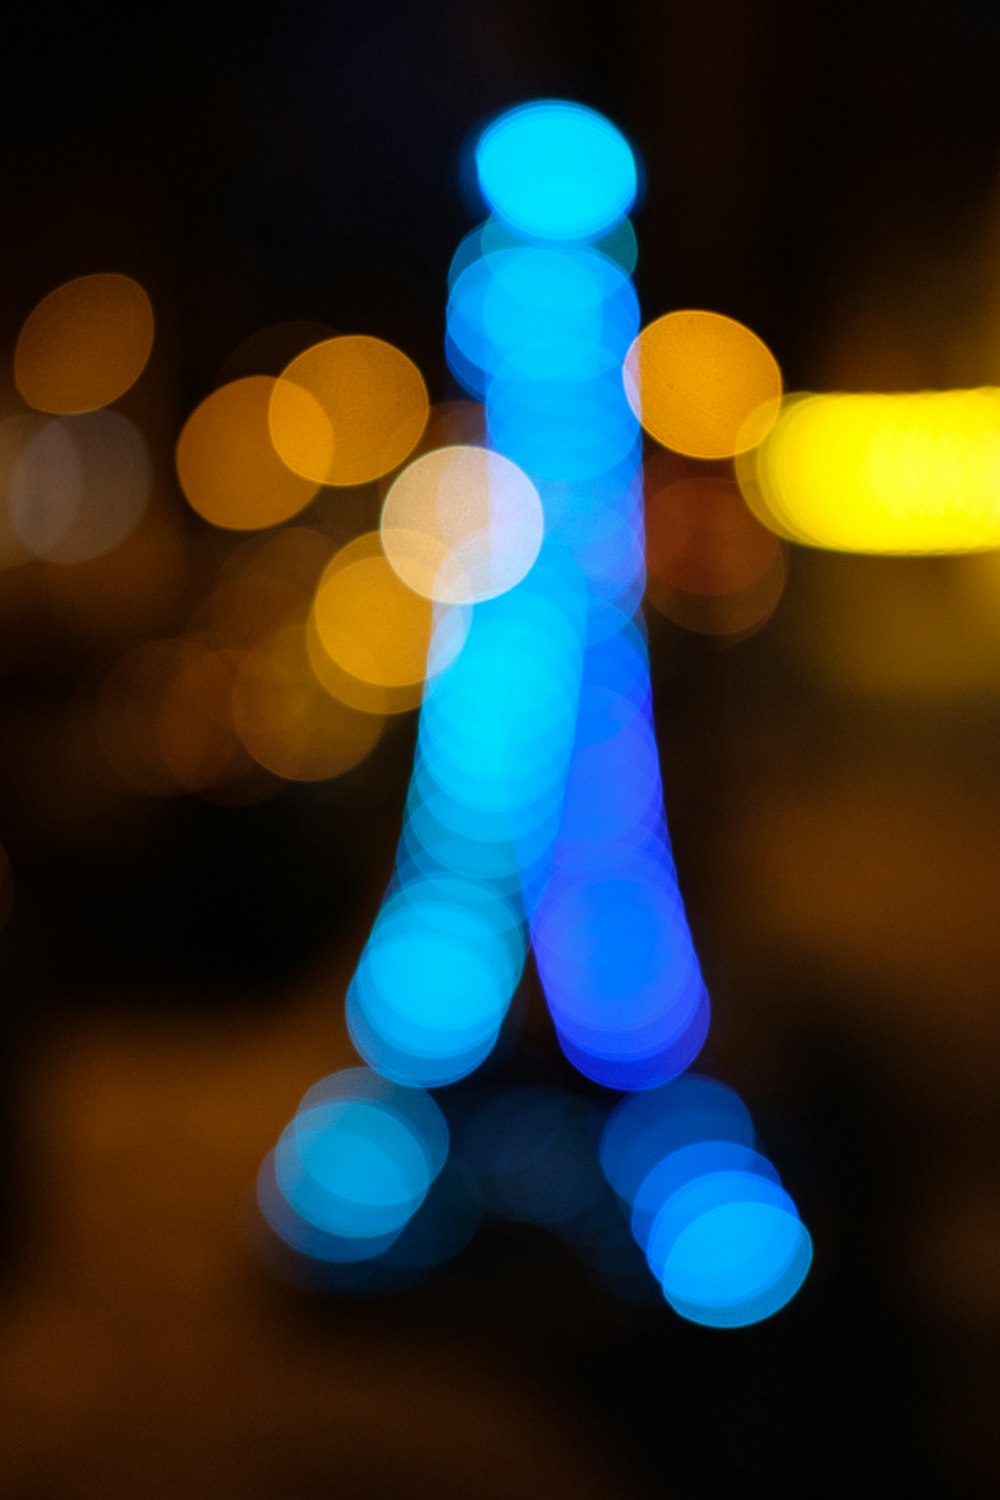 a blurry photo of a blurry image of the eiffel tower